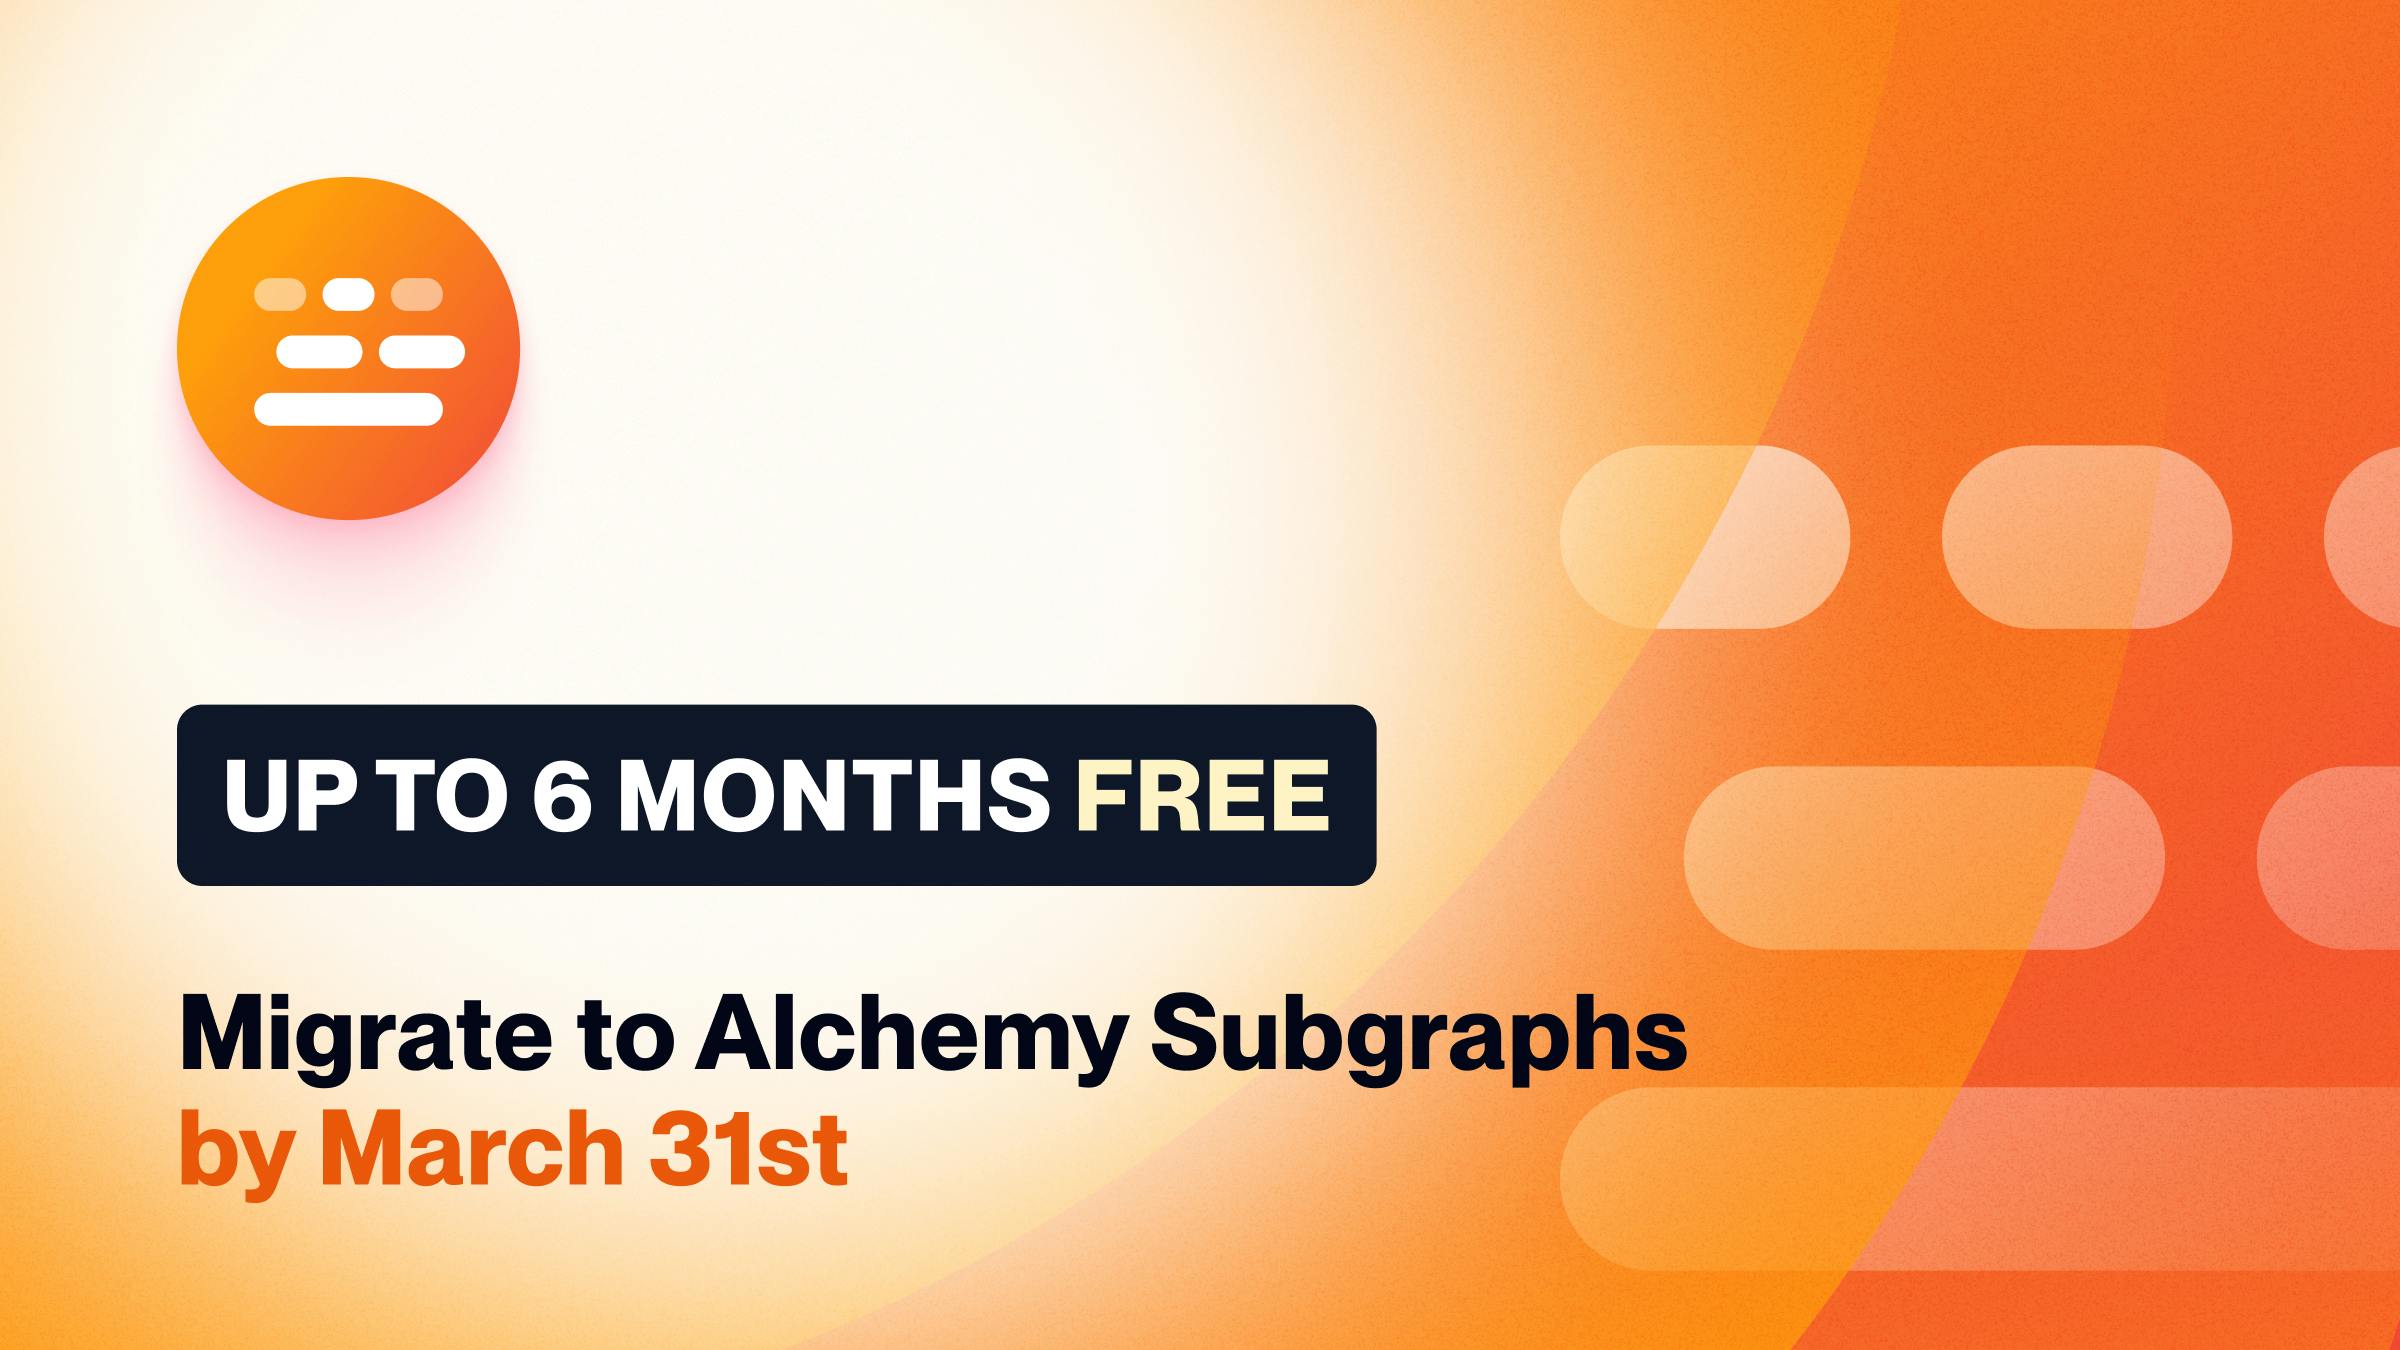 New Alchemy Subgraphs users can get up to 6 months free when migrating by March 31, 2024.